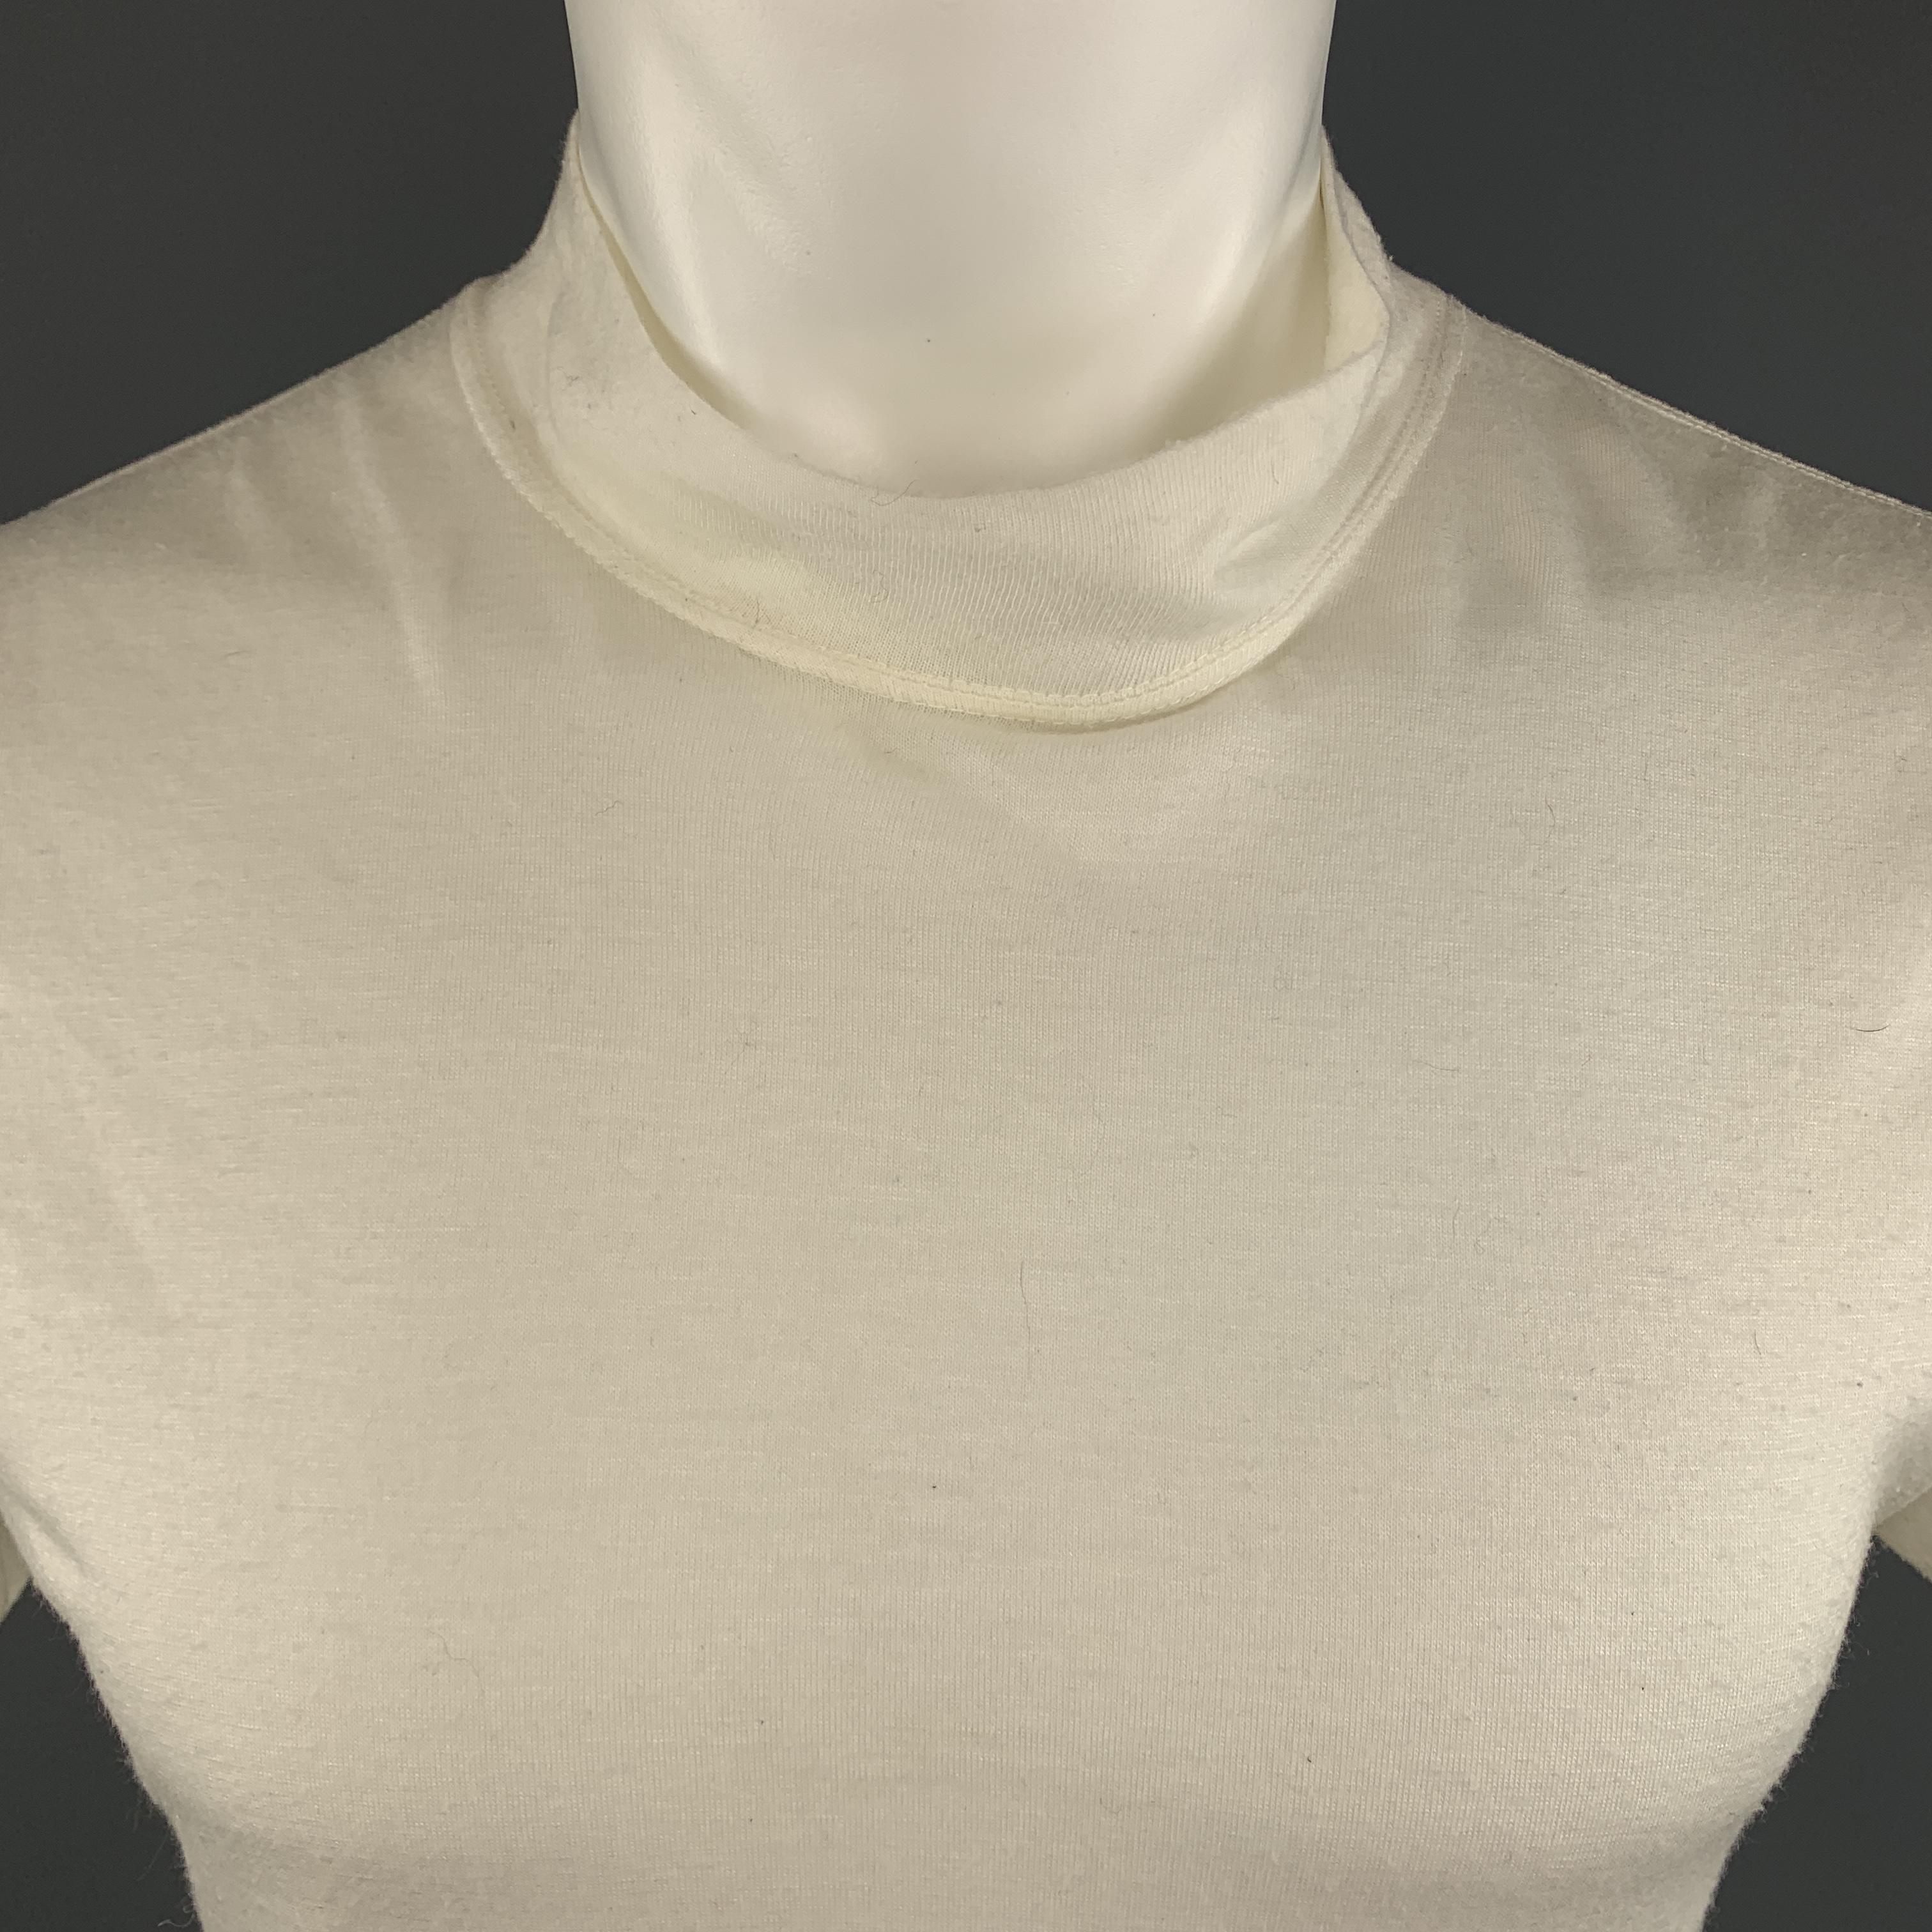 COMME DES GARCONS HOMME PLUS T-shirt comes in a white tone in a solid acrylic material, with a mock neck, short sleeves and a color trim at hem. AD1996. Made in Japan.
 
Very Good  Pre-Owned Condition.
Marked: No Size
 
Measurements:
 
Shoulder: 17